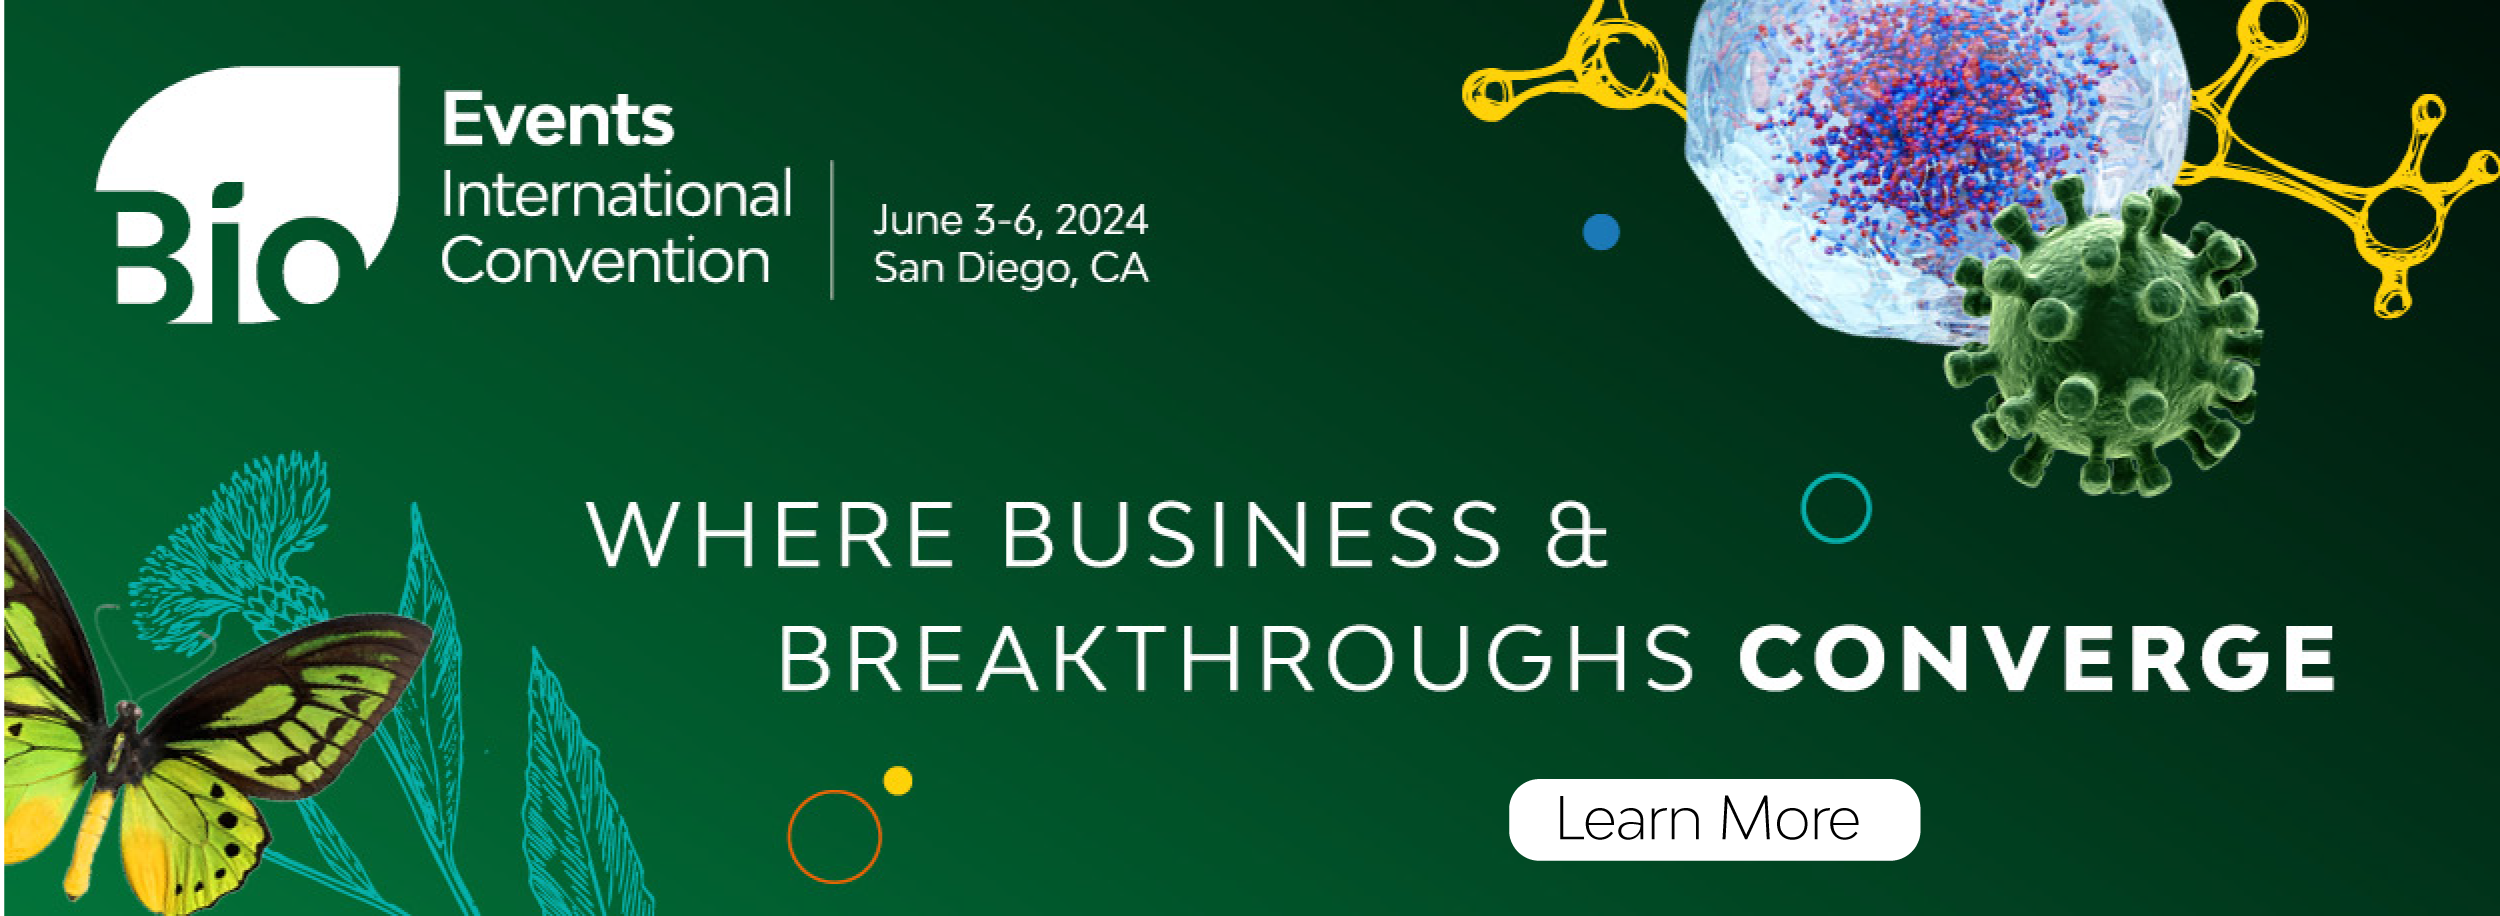 Register now for the BIO International Convention from June 3-6 in San Diego.